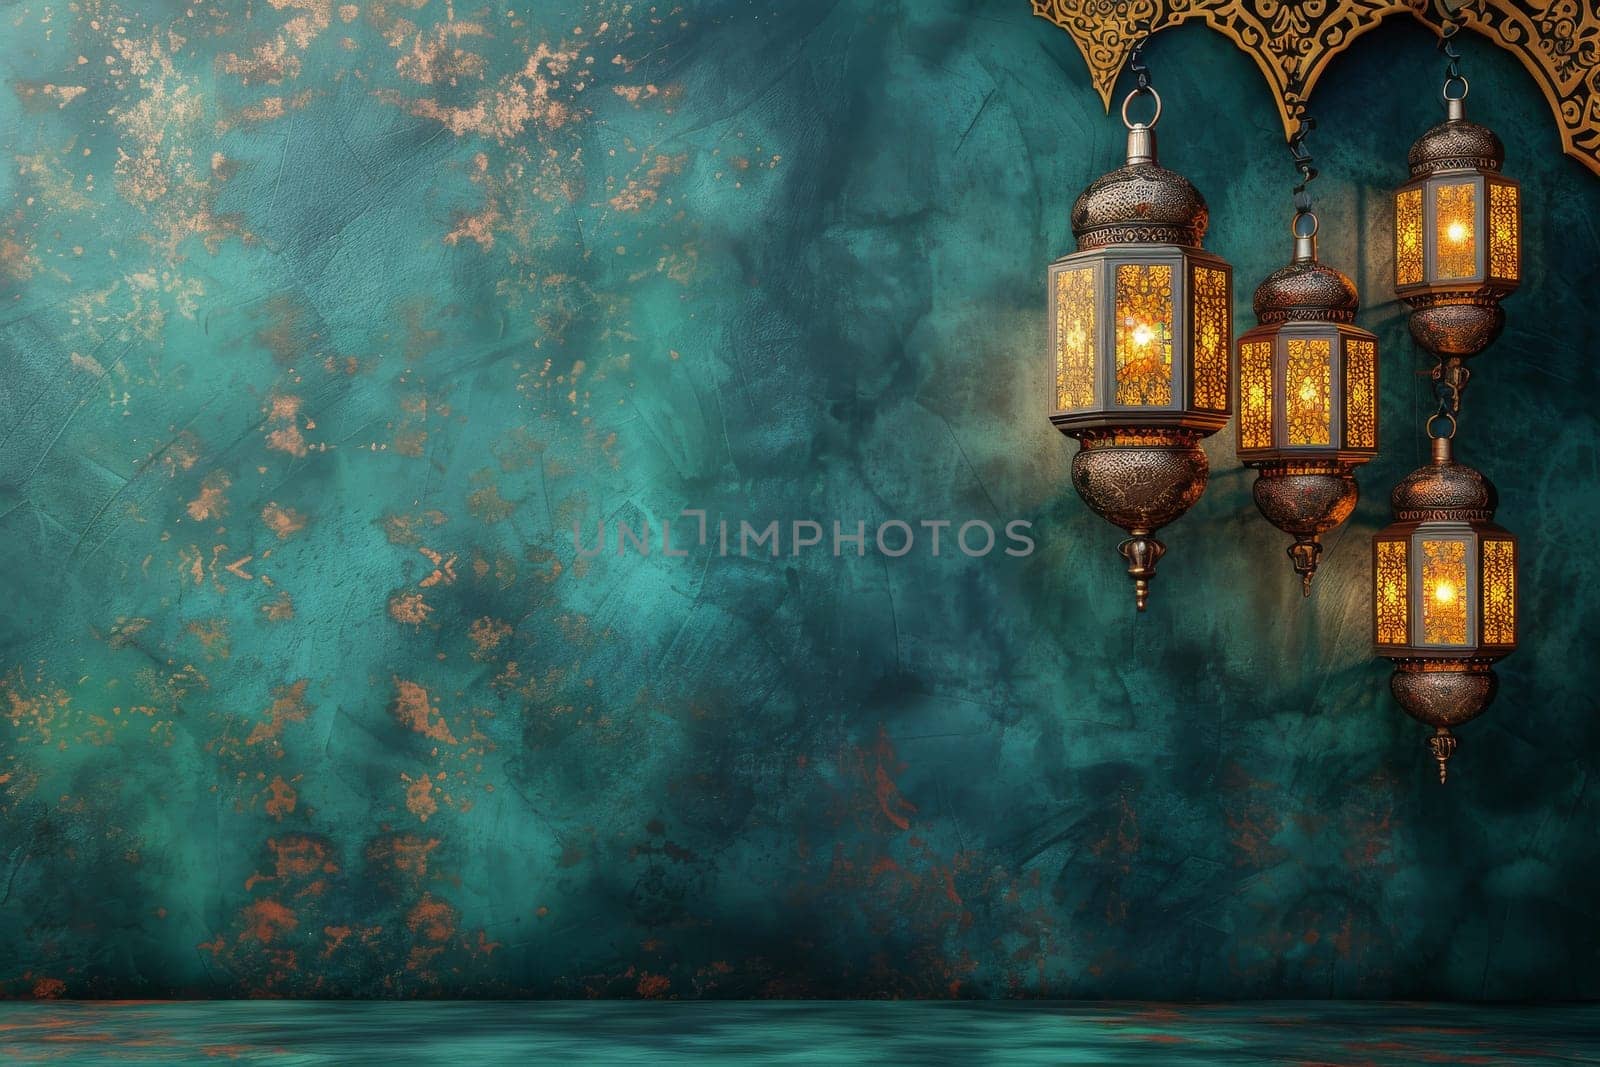 A blue wall with a green background and a row of four lanterns hanging from the ceiling. The lanterns are lit, creating a warm and inviting atmosphere. Scene is cozy and welcoming